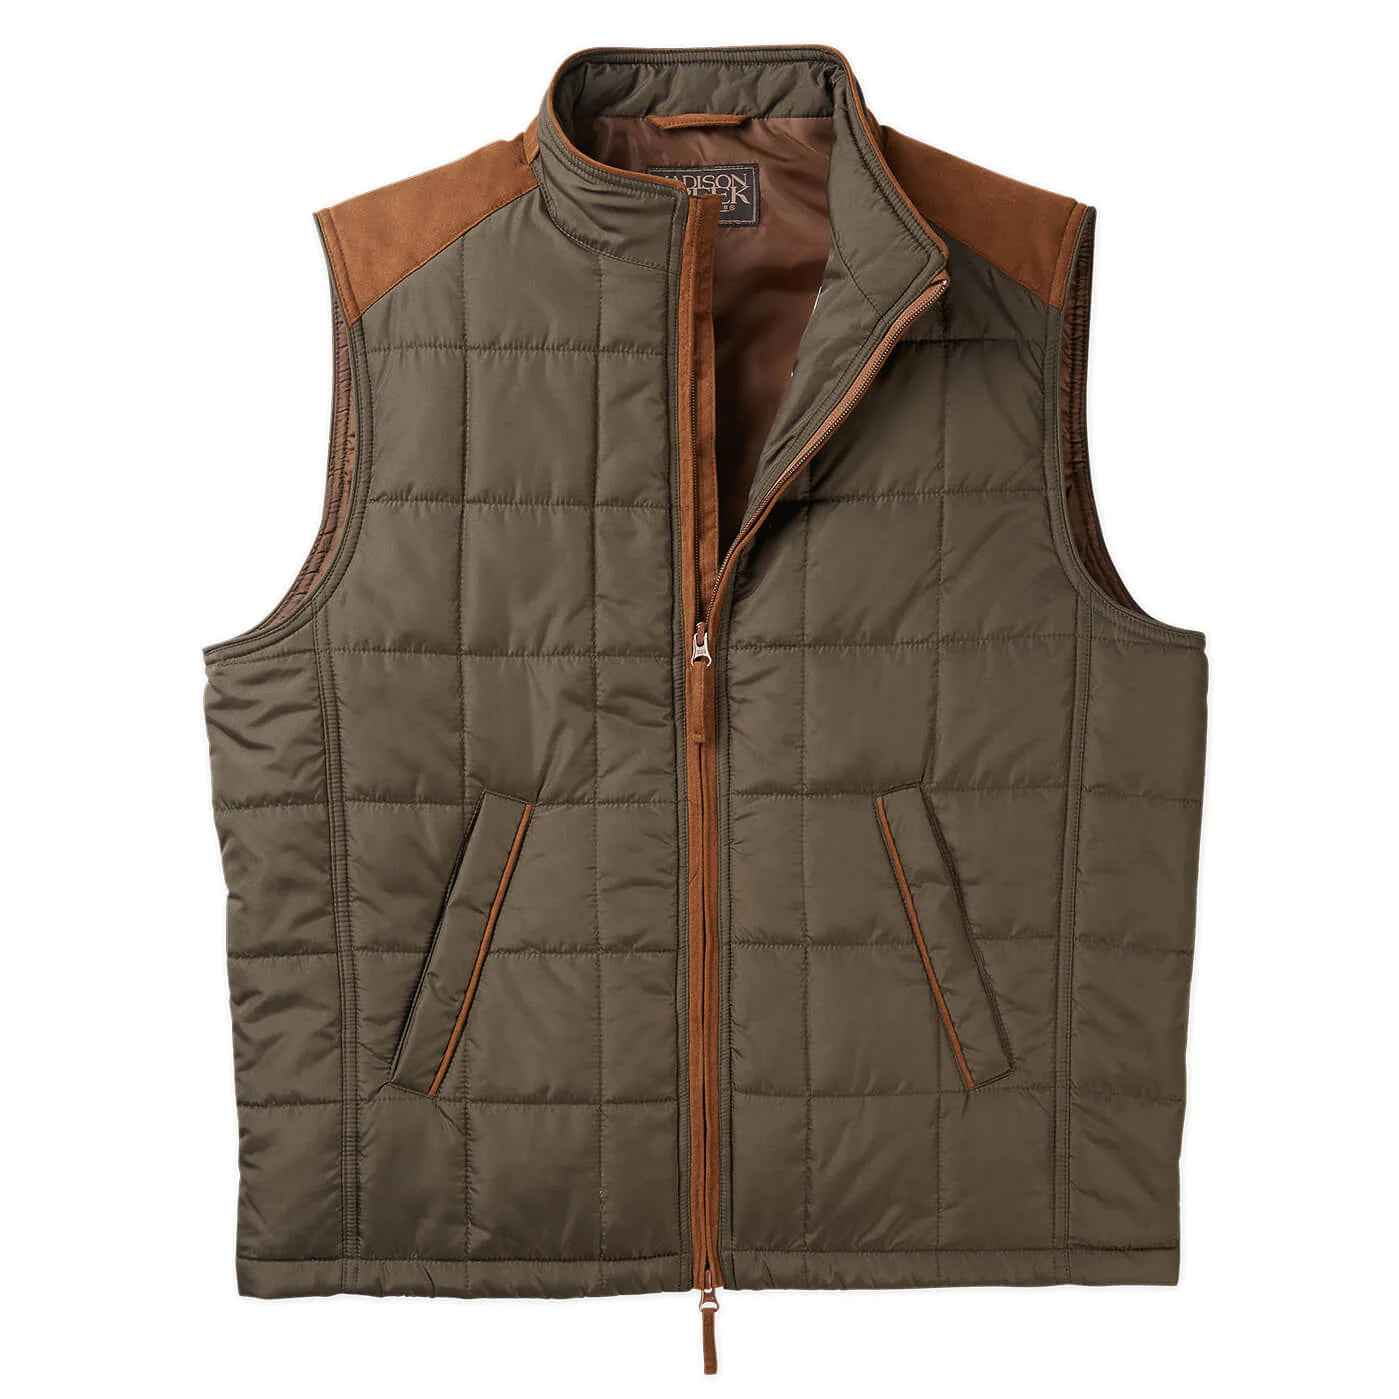 Madison Creek Outfitters Shelby Lightweight Nylon Quilted Vest - Loden